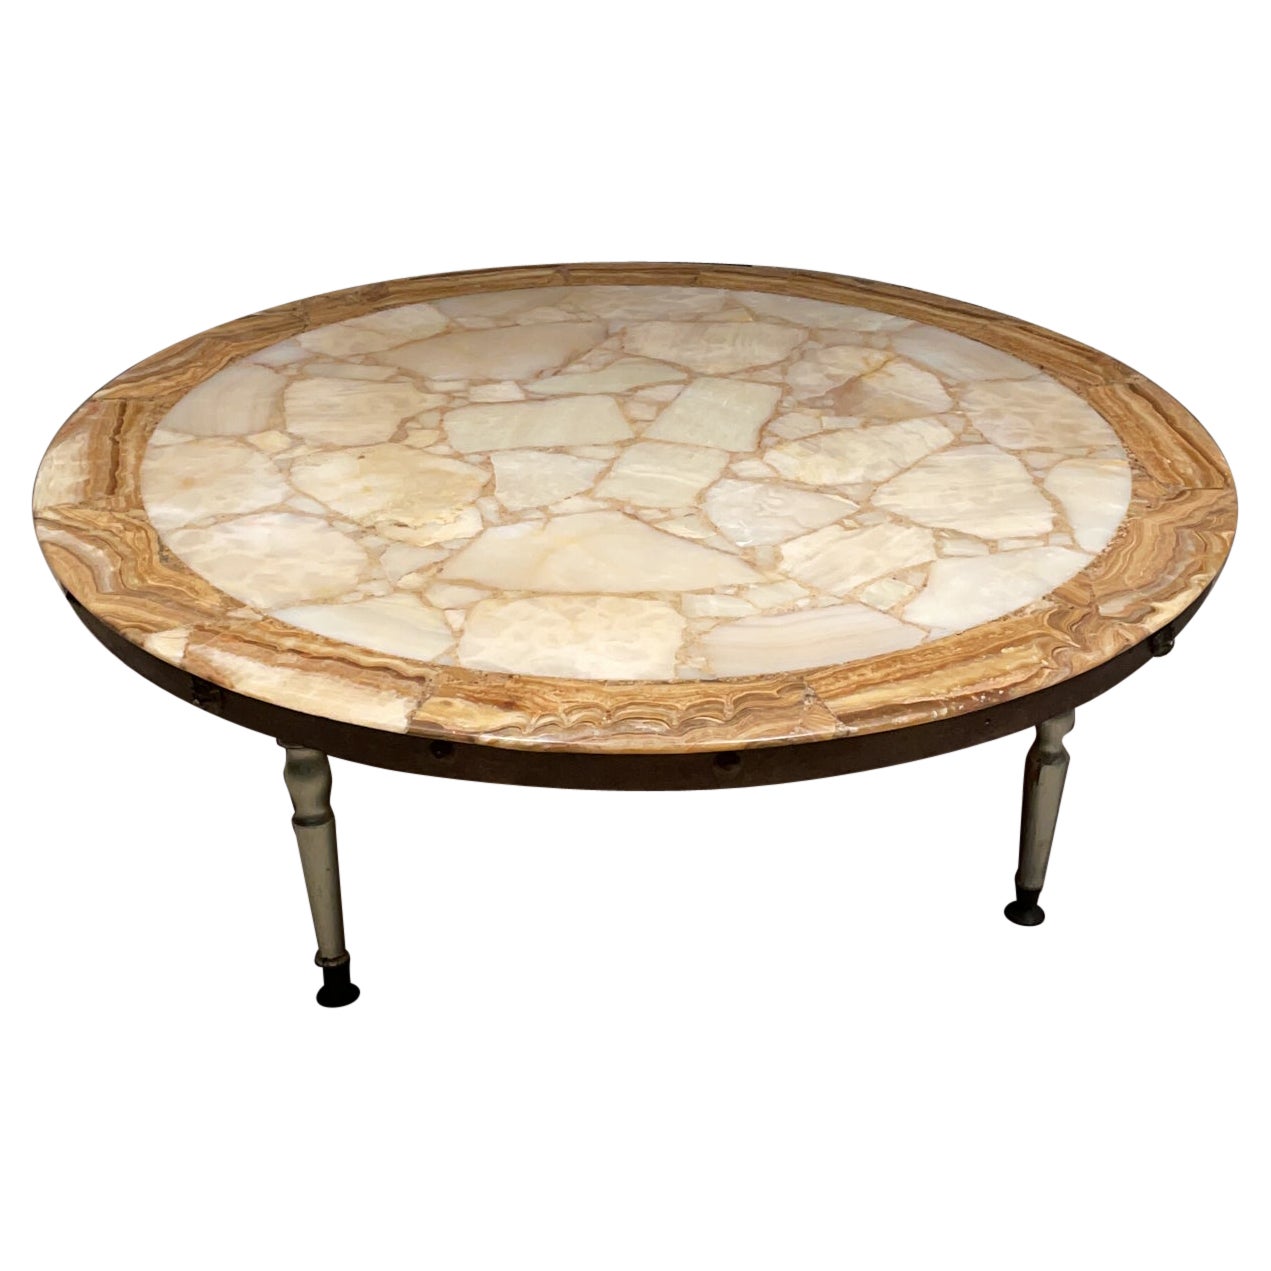 1960s Glamorous Modern Round Coffee Table in Onyx Stone by Muller of Mexico 